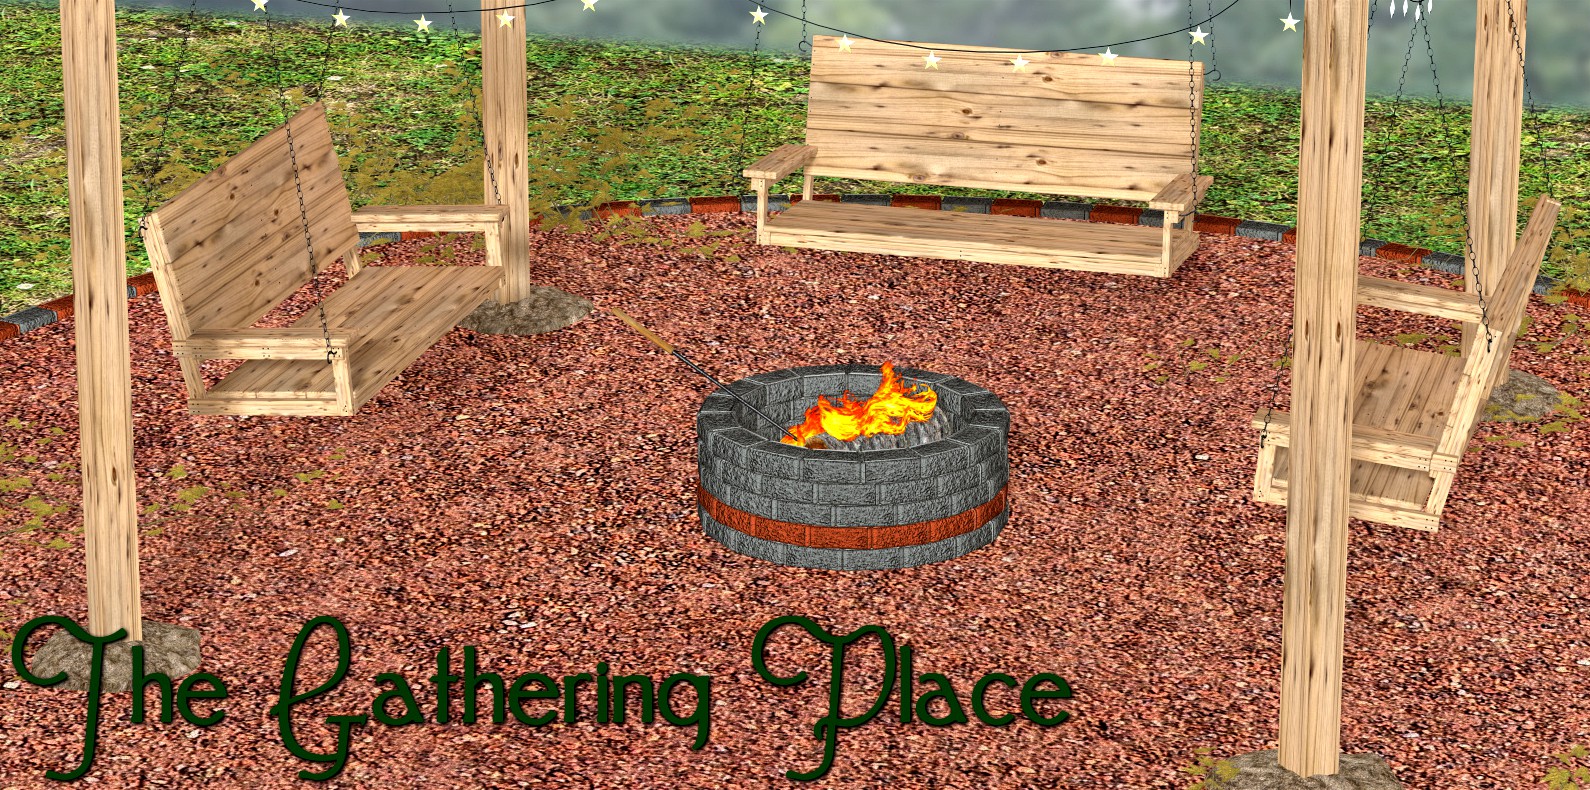 The Gathering Place for Poser